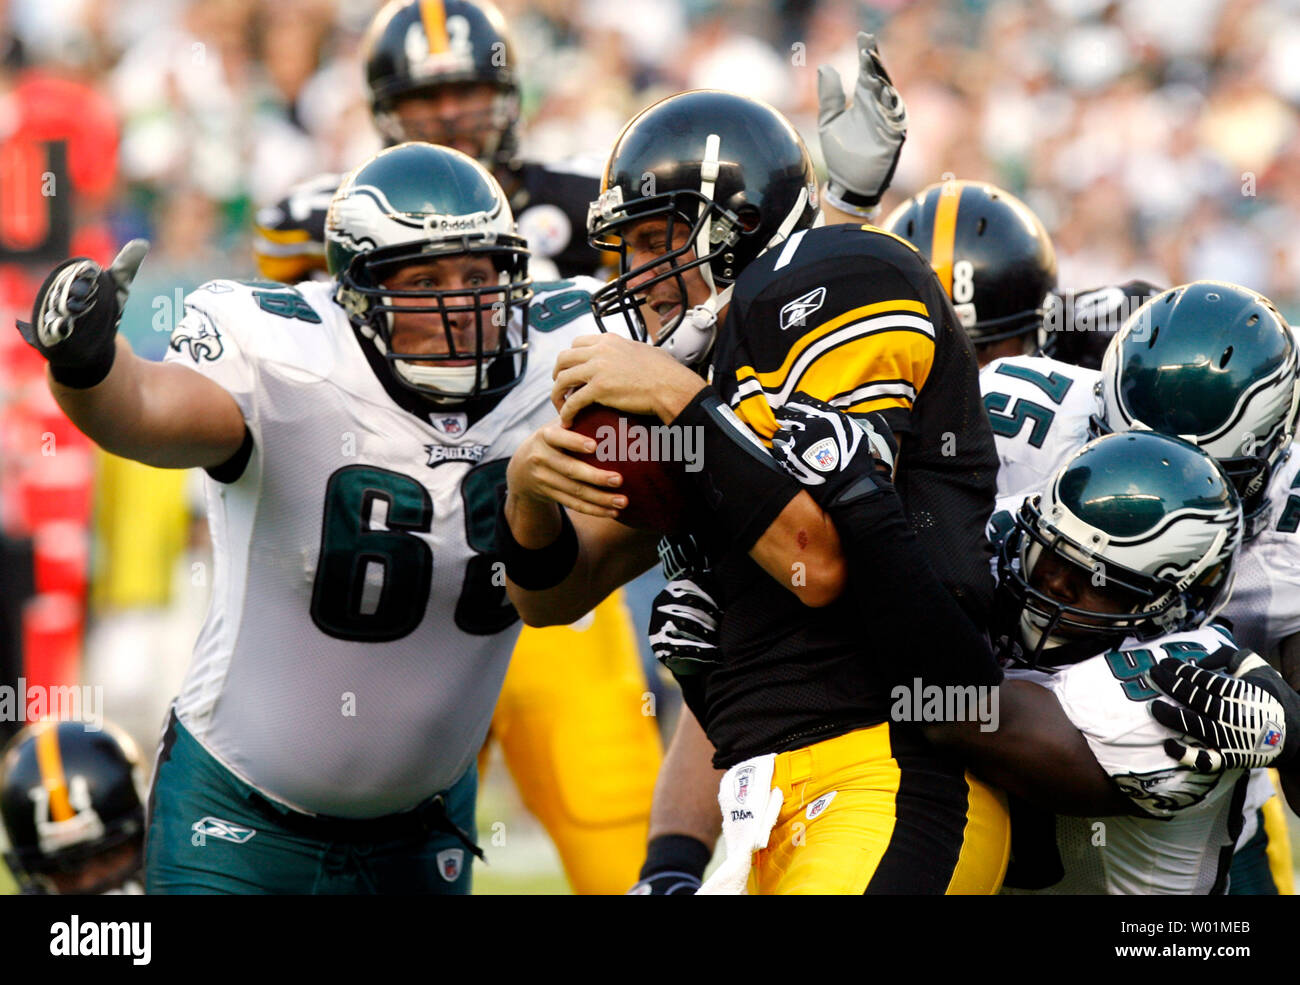 Pittsburgh Steelers quarterback Ben Roethlisberger  is sacked on the Pittsburgh 31-yard line for a 2-yard loss during first quarter play in Philadelphia at Lincoln Financial Field September 21, 2008. Making the sack are Philadelphia Eagles Dan Klecko (68), Mike Patterson (98) and Juqua Parker. Philadelphia defeated Pittsburgh 15-6.      (UPI Photo/John Anderson) Stock Photo